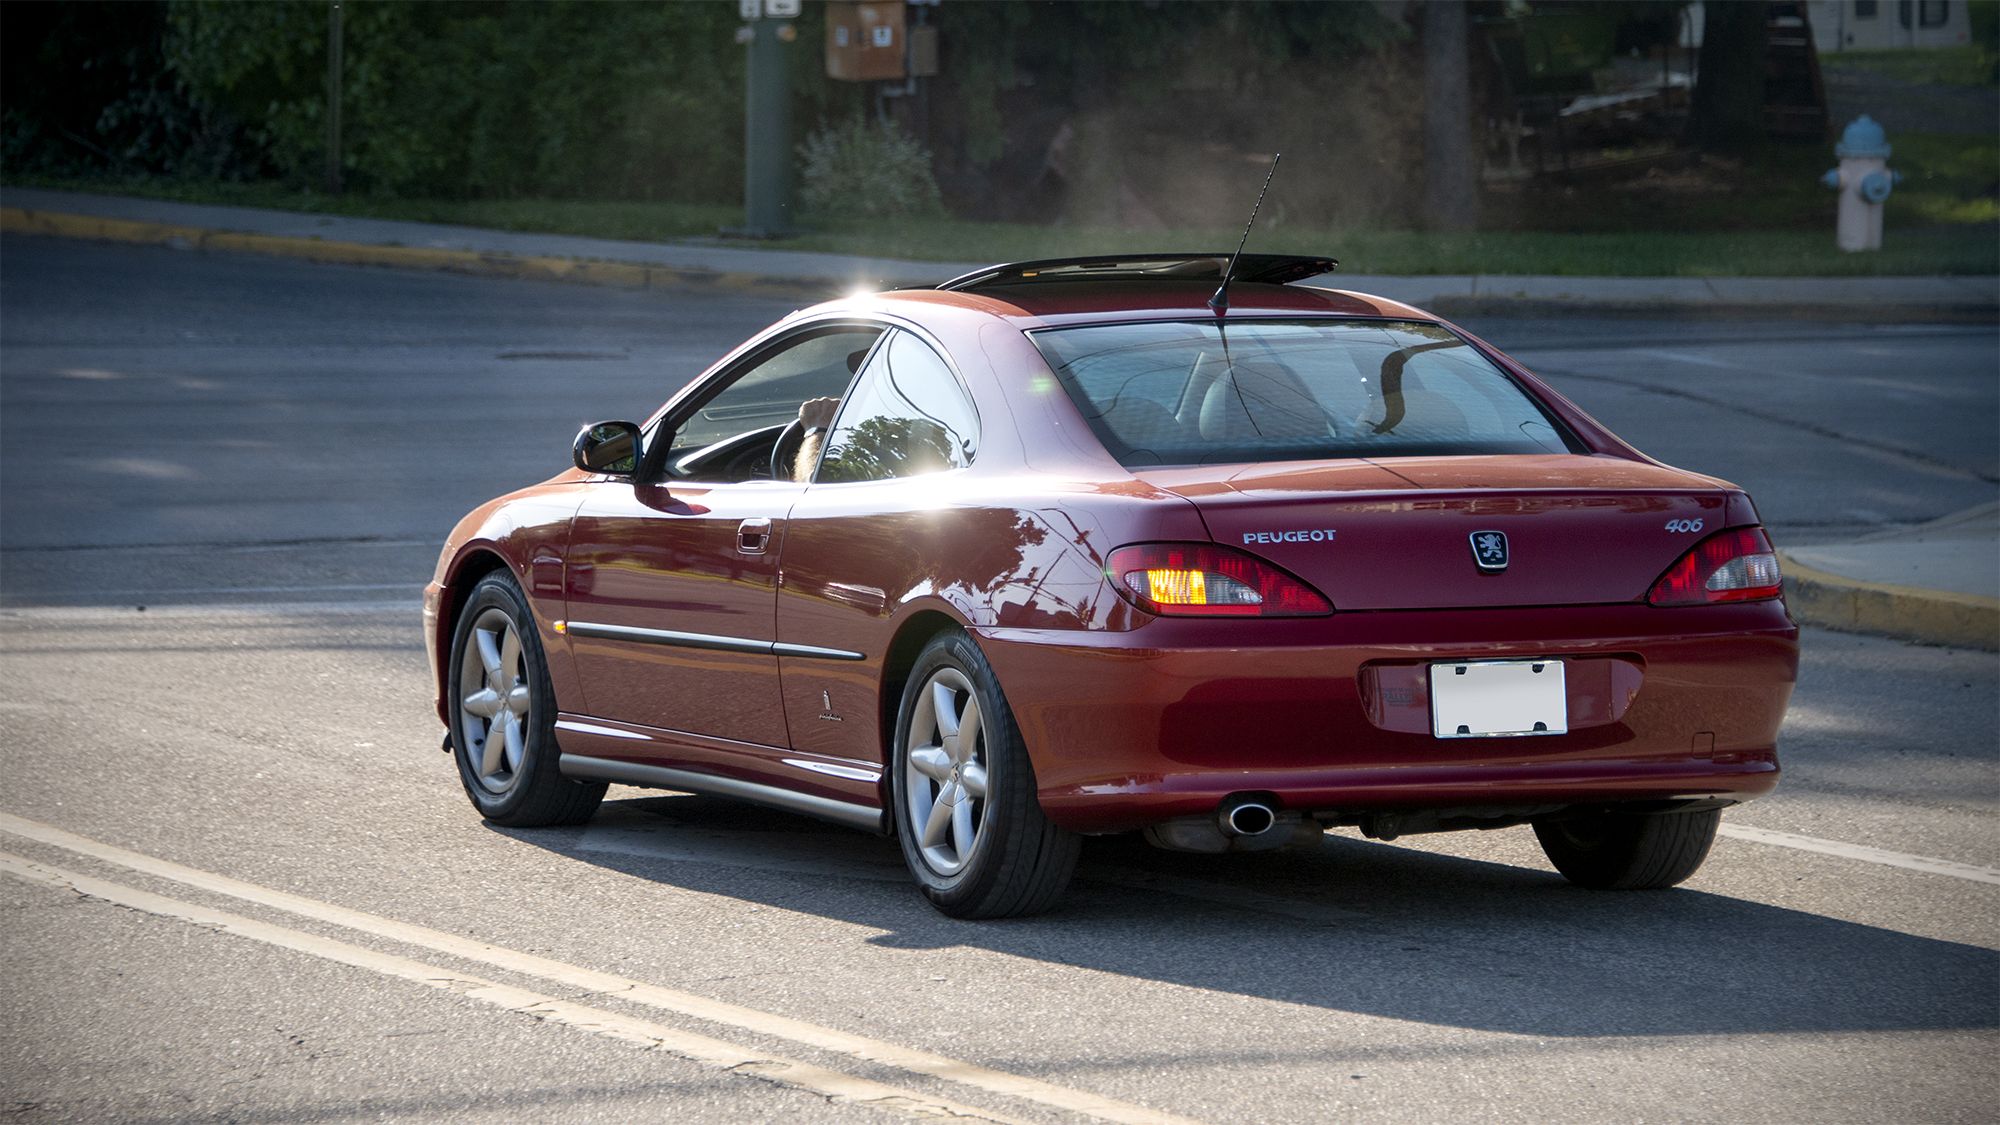 Curbside Classic: Peugeot 406 Coupe: The Last Of An Elegant Line - Curbside  Classic